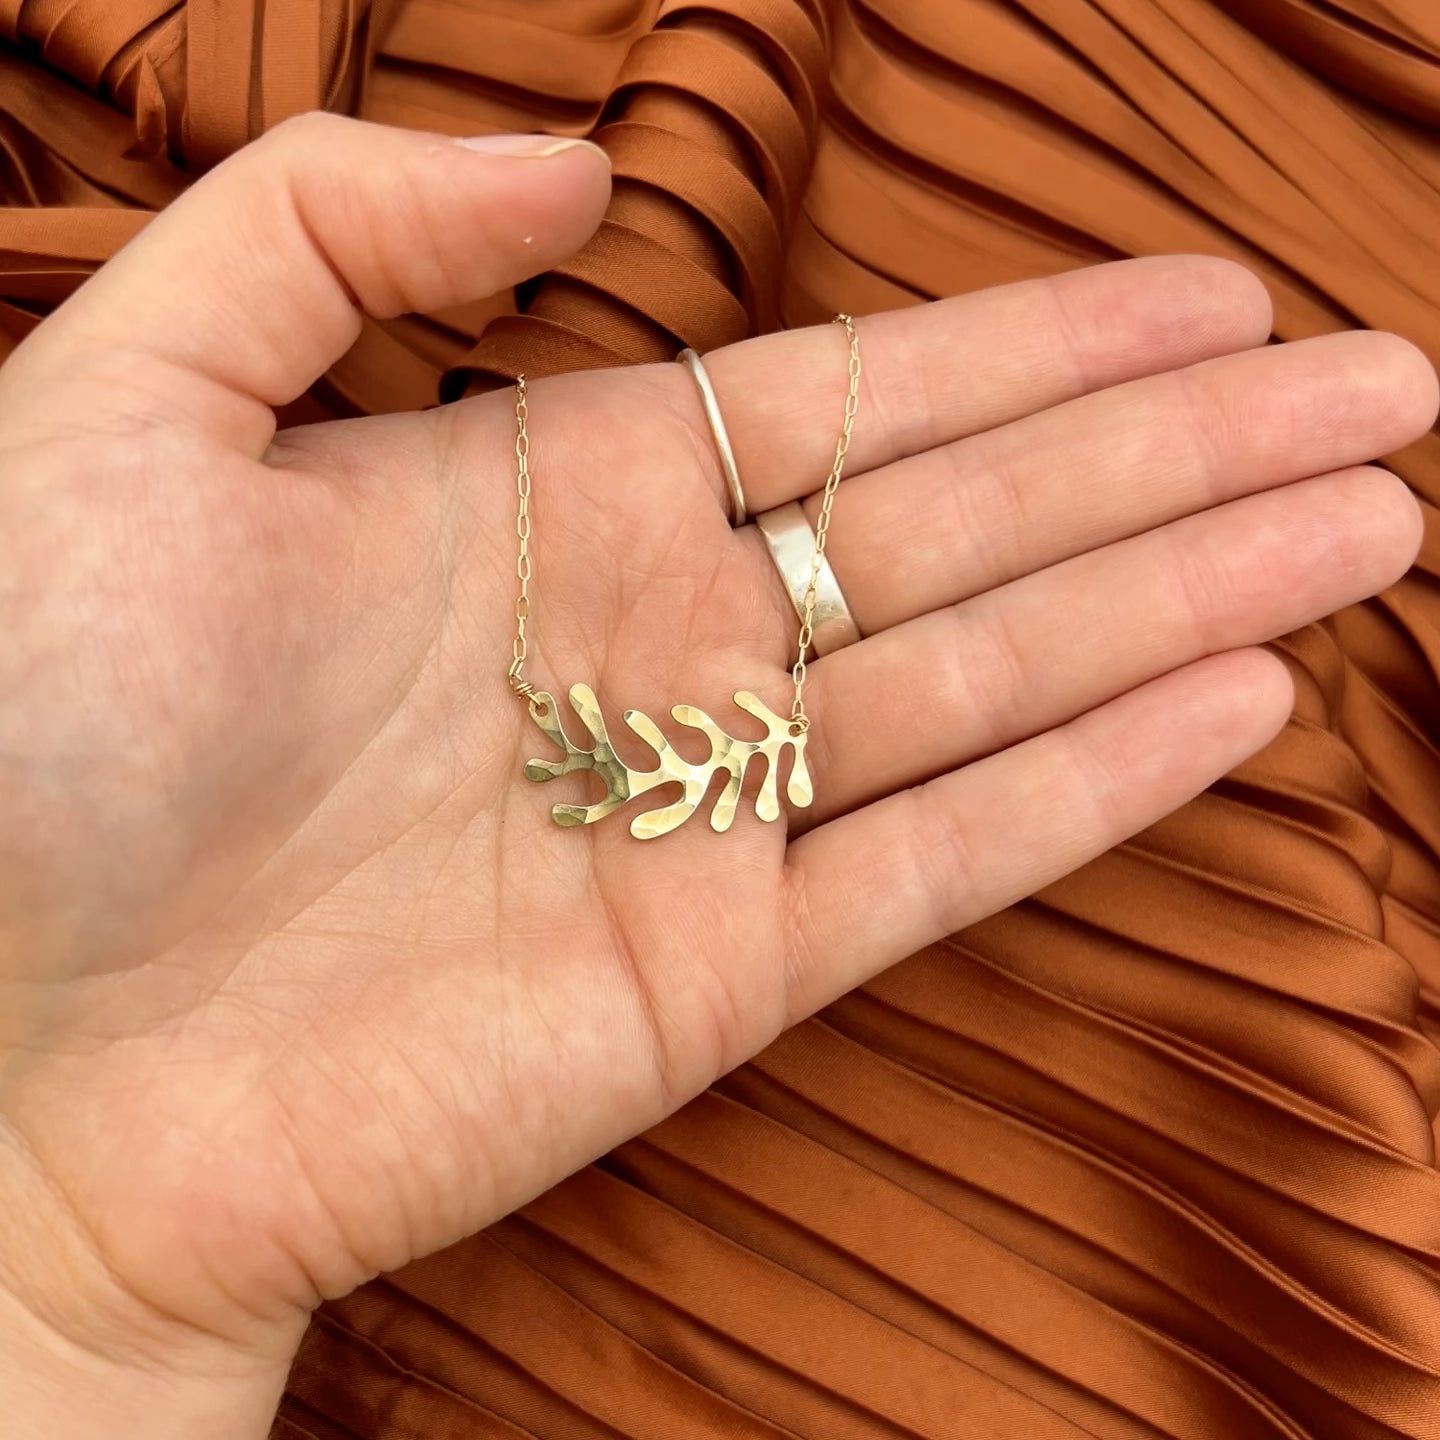 Roots Necklace